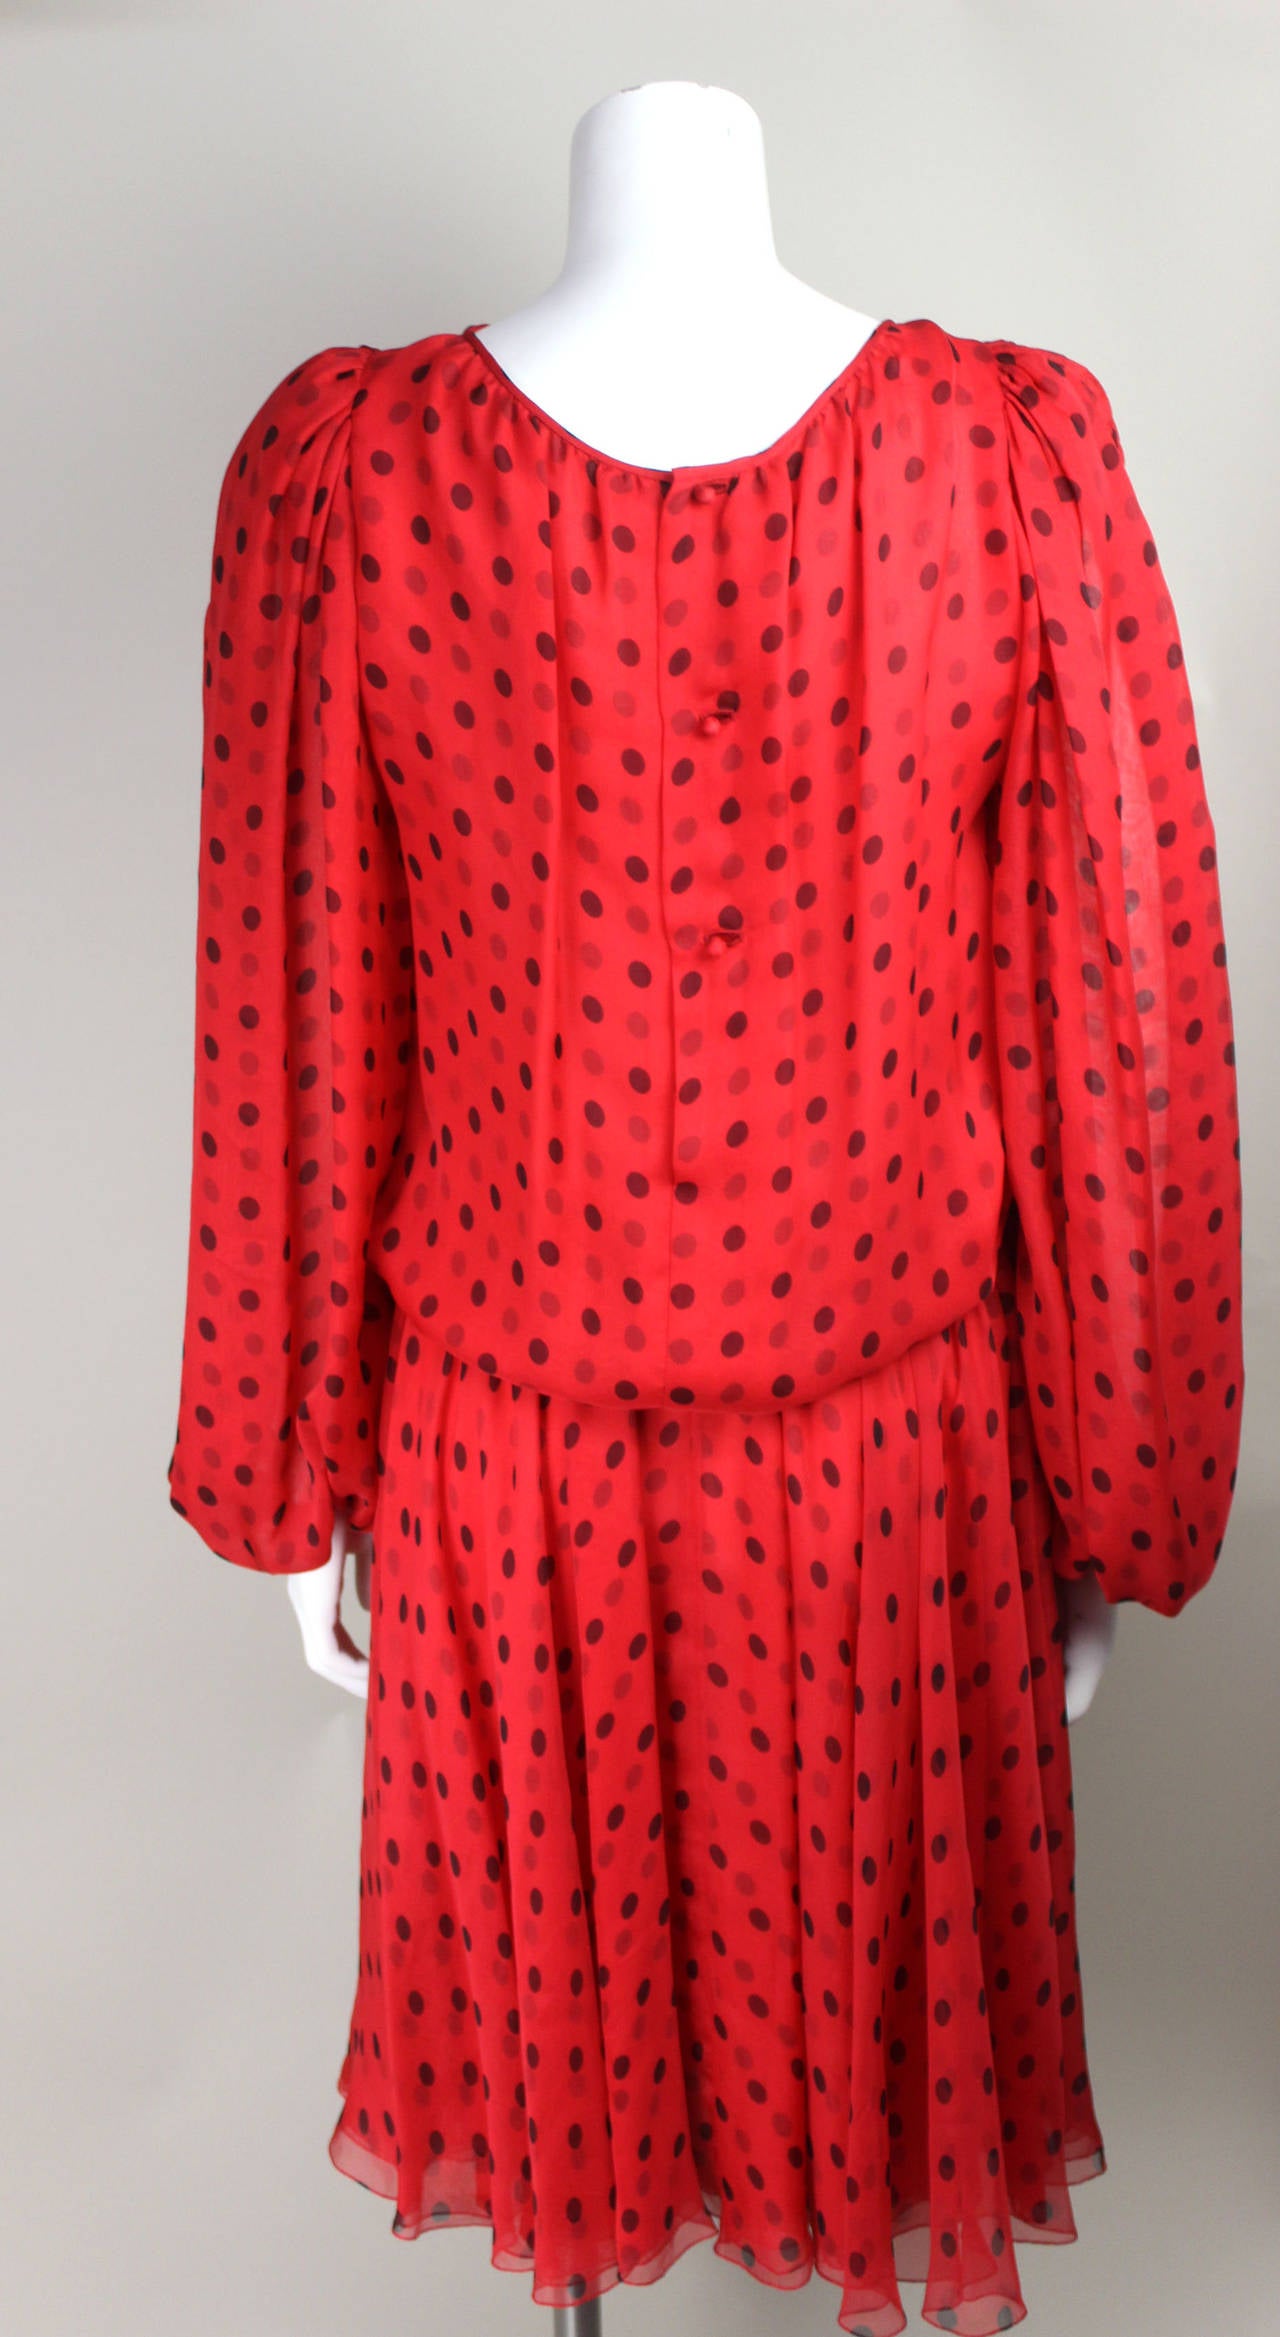 Galanos 1970s Fluid Silky Polka Dot Dress In Excellent Condition For Sale In New York, NY